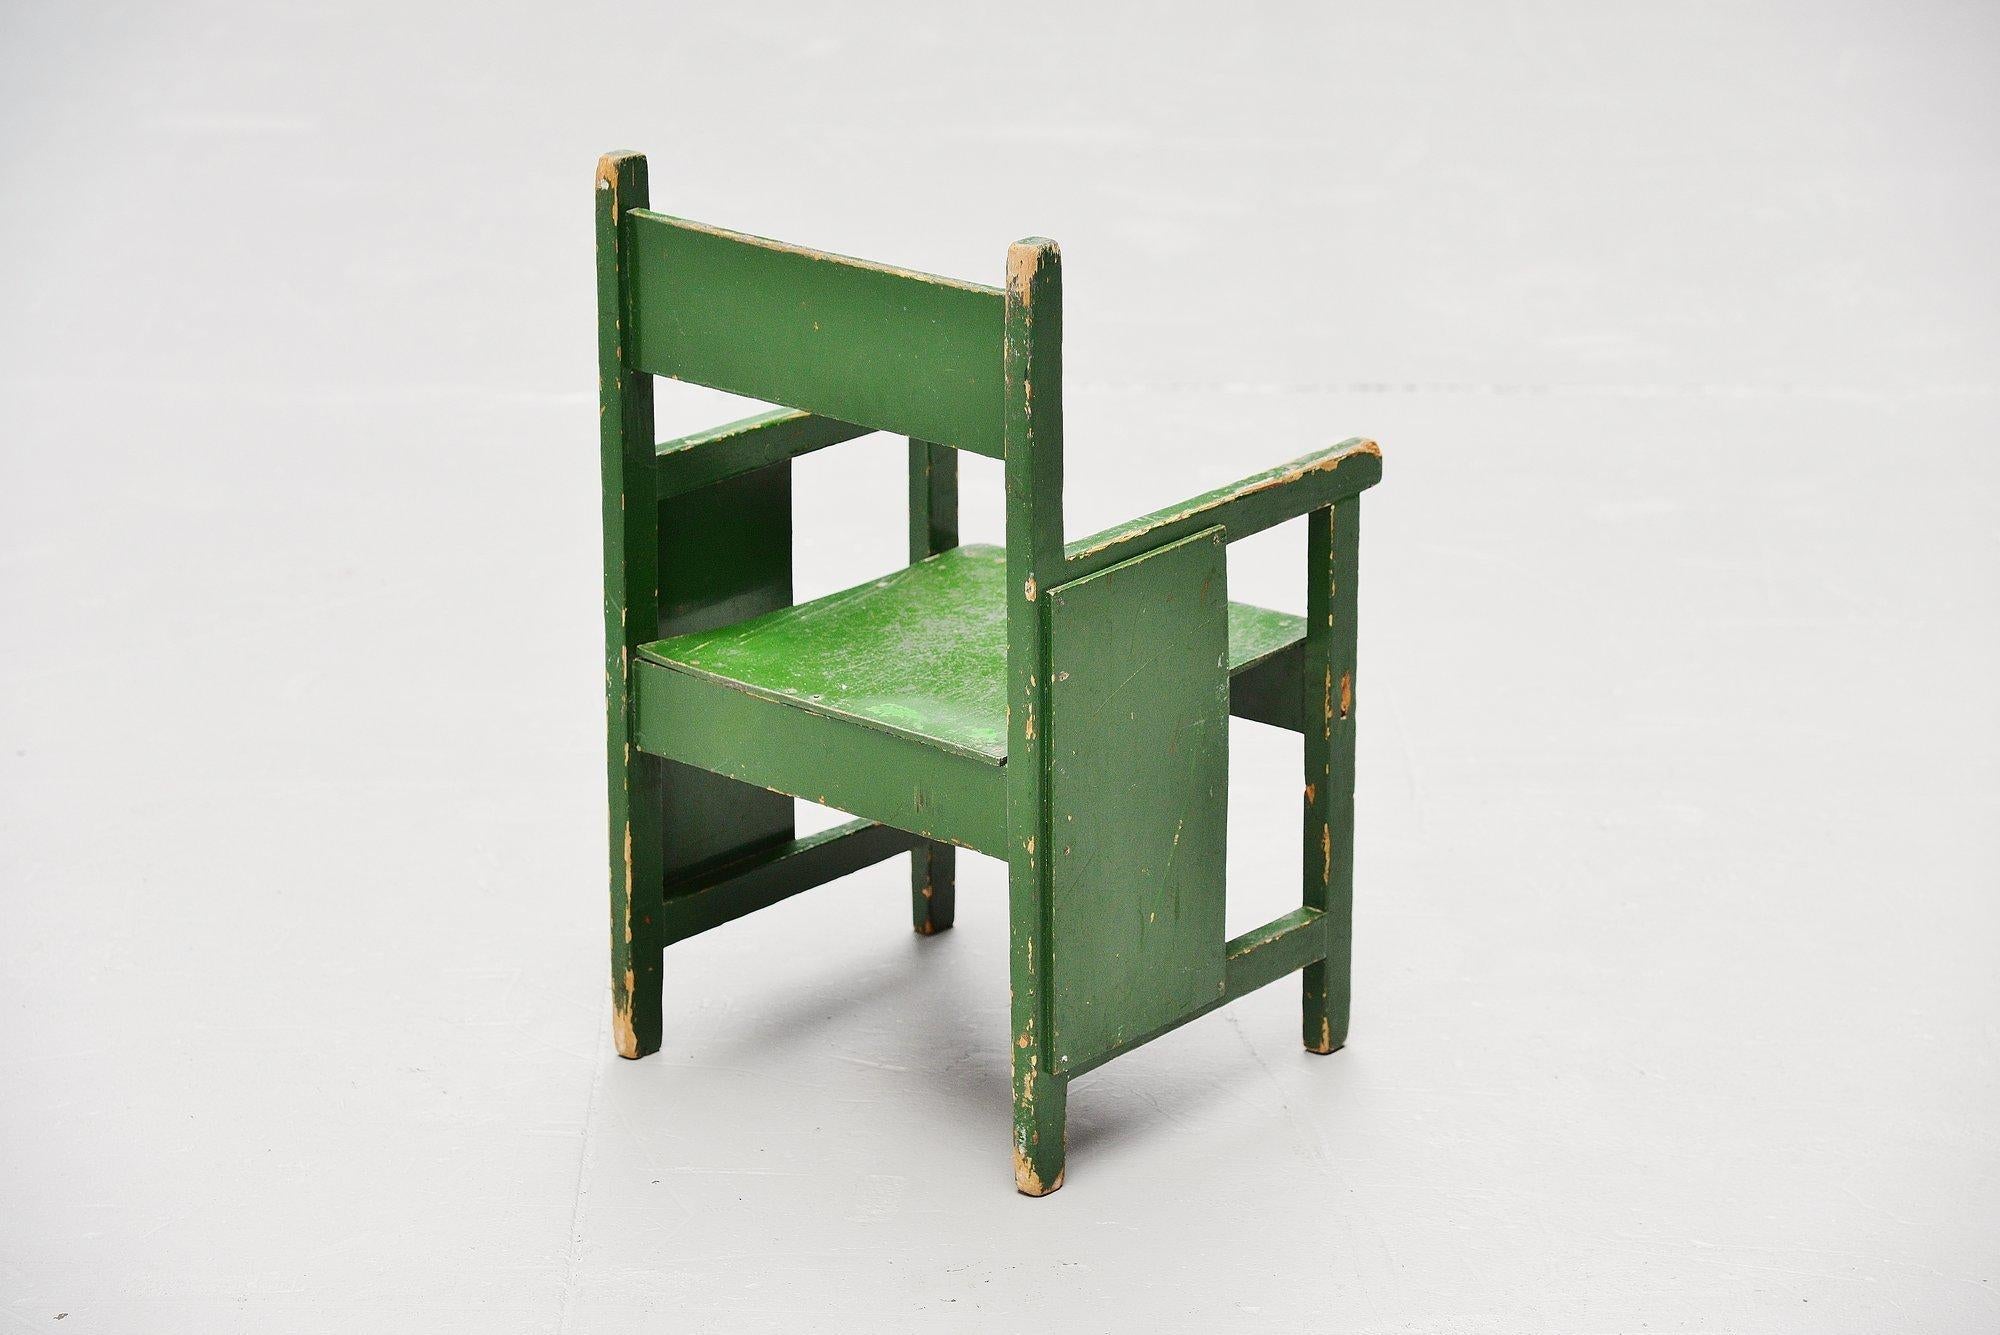 Super rare early kids chair, designed by Ko Verzuu for Ado Holland in the 1932. Ado means Arbeid door onvolwaardigen, translated; labor by incapacitated, which makes this an even more special piece. Toys by Ado are being highly collected at the